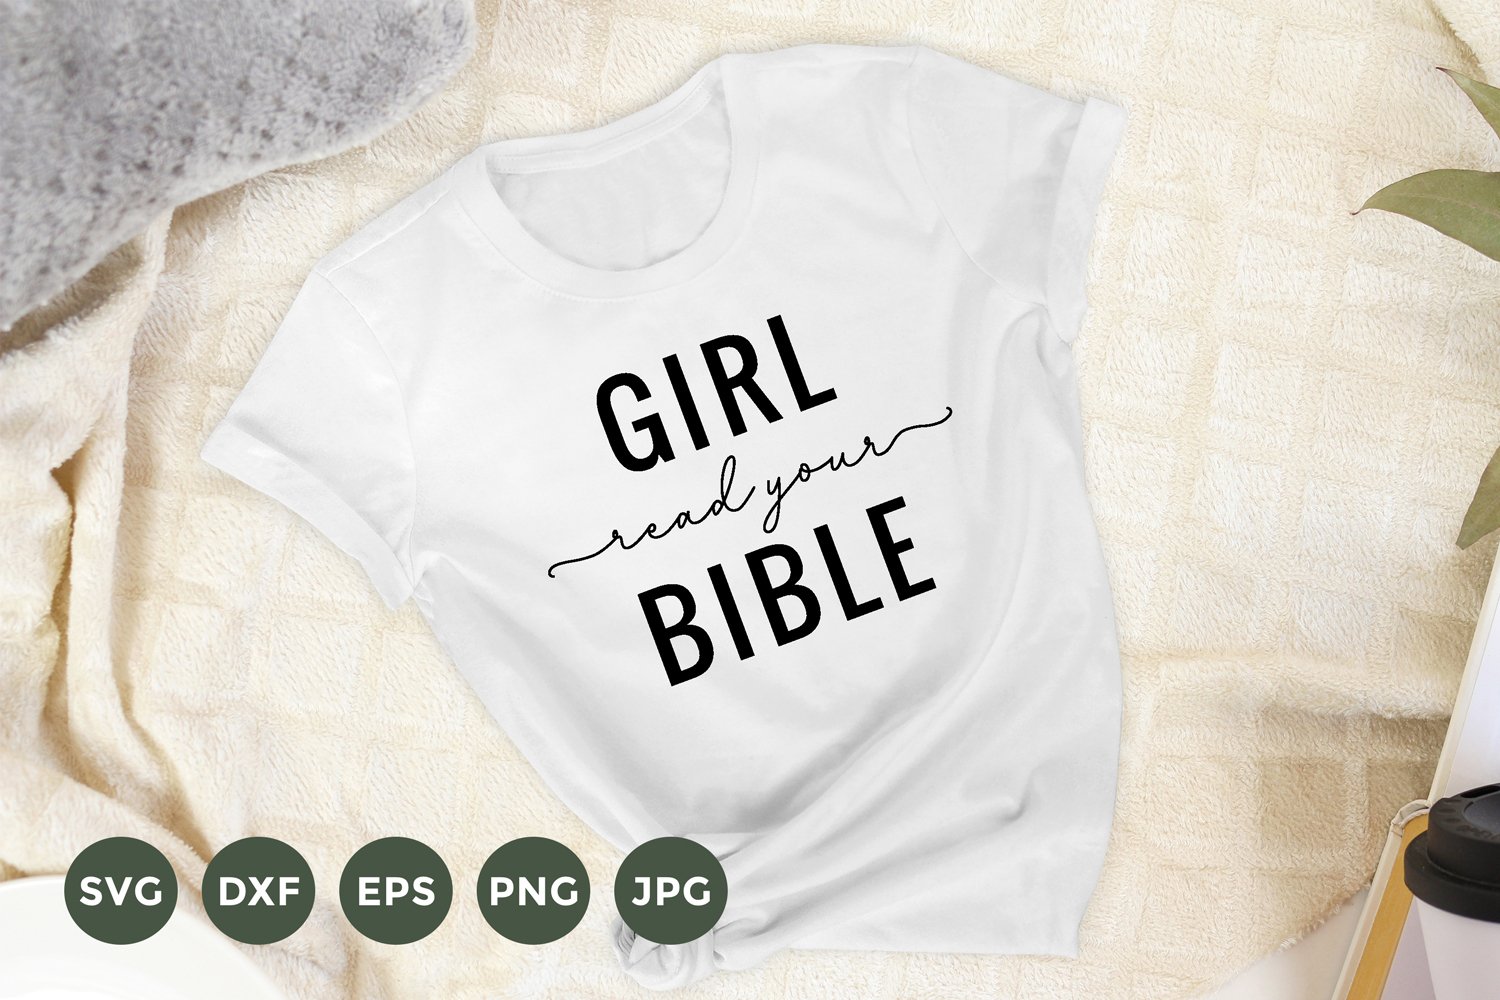 Cover image of Bible Quote T-Shirt Design.